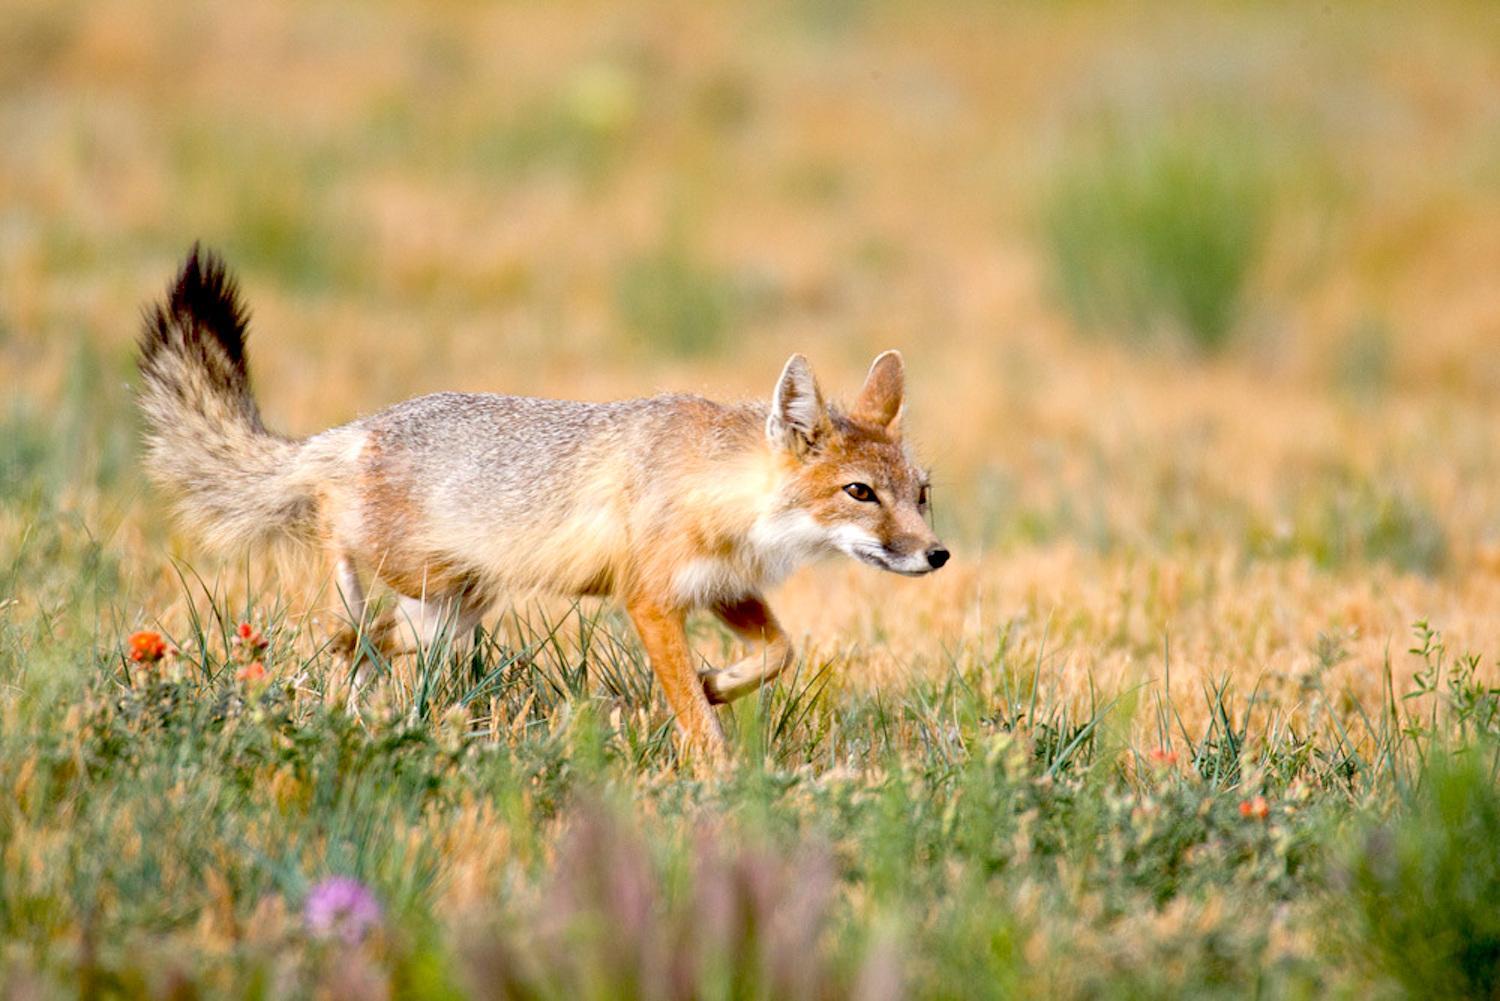 The Swift fox avoided extinction thanks to collaborative efforts and protected habitat/(c) Greg Lasley, some rights reserved (CC BY-NC)